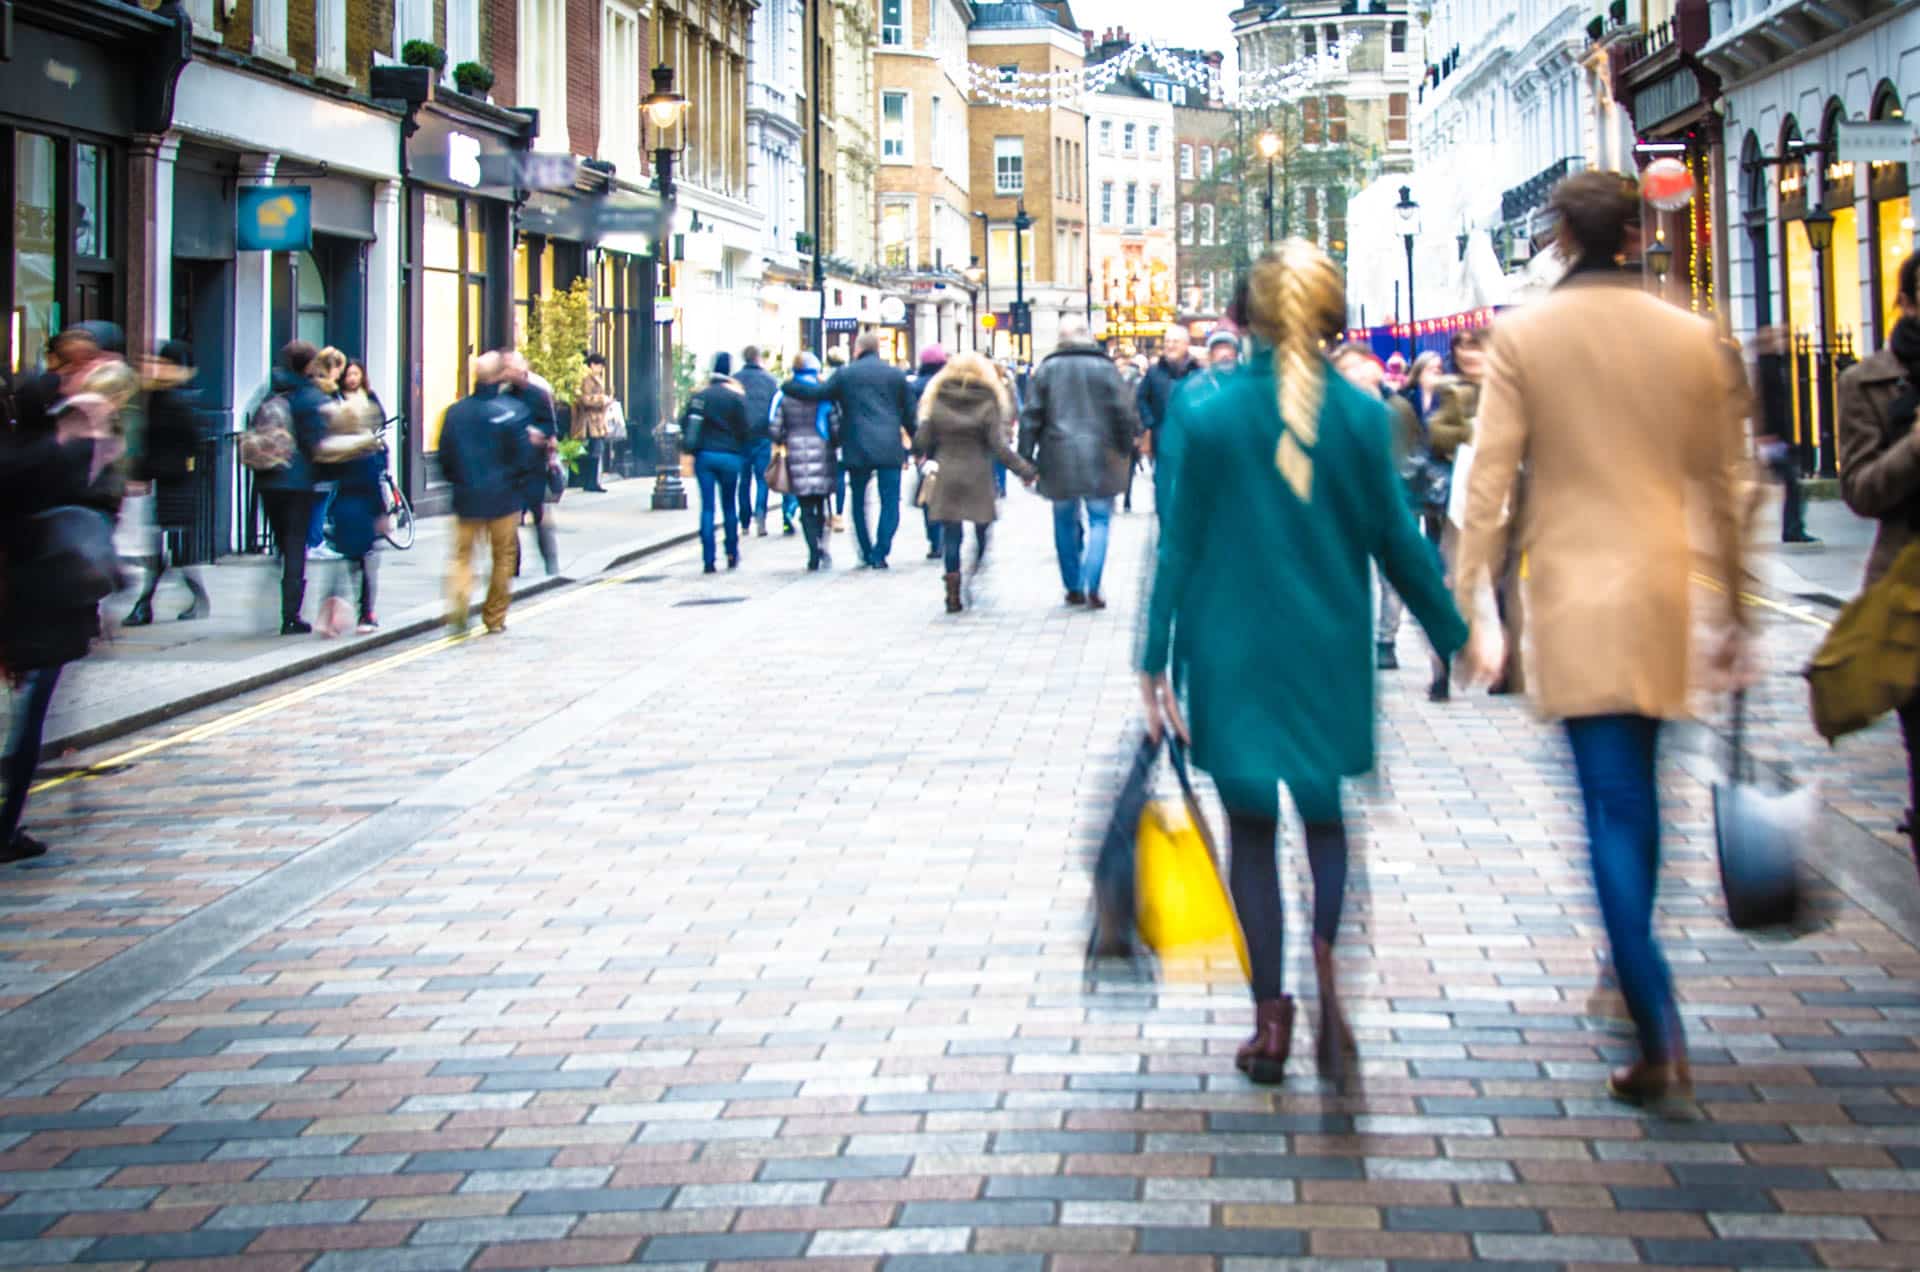 Shoppers holding hands in busy London high street